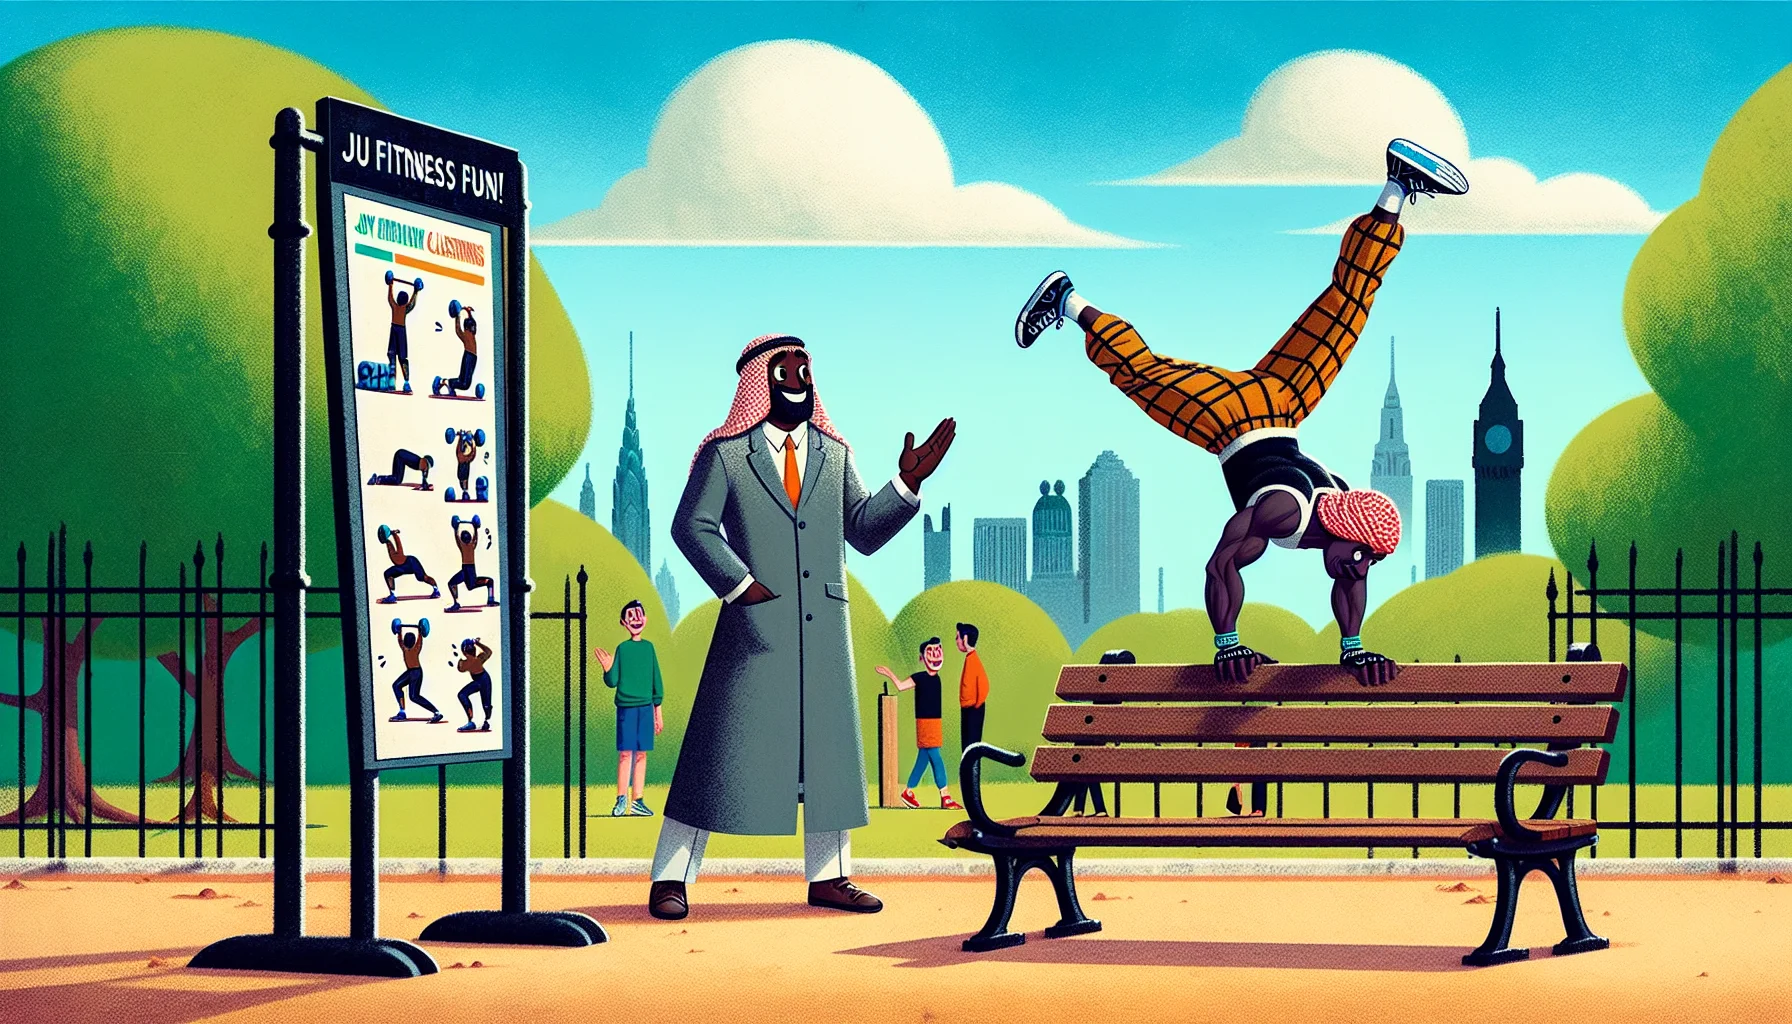 Create an image of a lively park scene. In the foreground, an athletic Middle-Eastern female showcasing her calisthenics skills by attempting a handstand on a park bench. An amused looking Black male passerby watches her, mimicking her actions in an exaggerated manner. The weather is sunny, and there's a 'Join the Fitness Fun!' banner strung between two trees. A sign nearby has images of various calisthenics exercises with comedic captions beneath them, encouraging people to get physically active in a fun and lighthearted way.